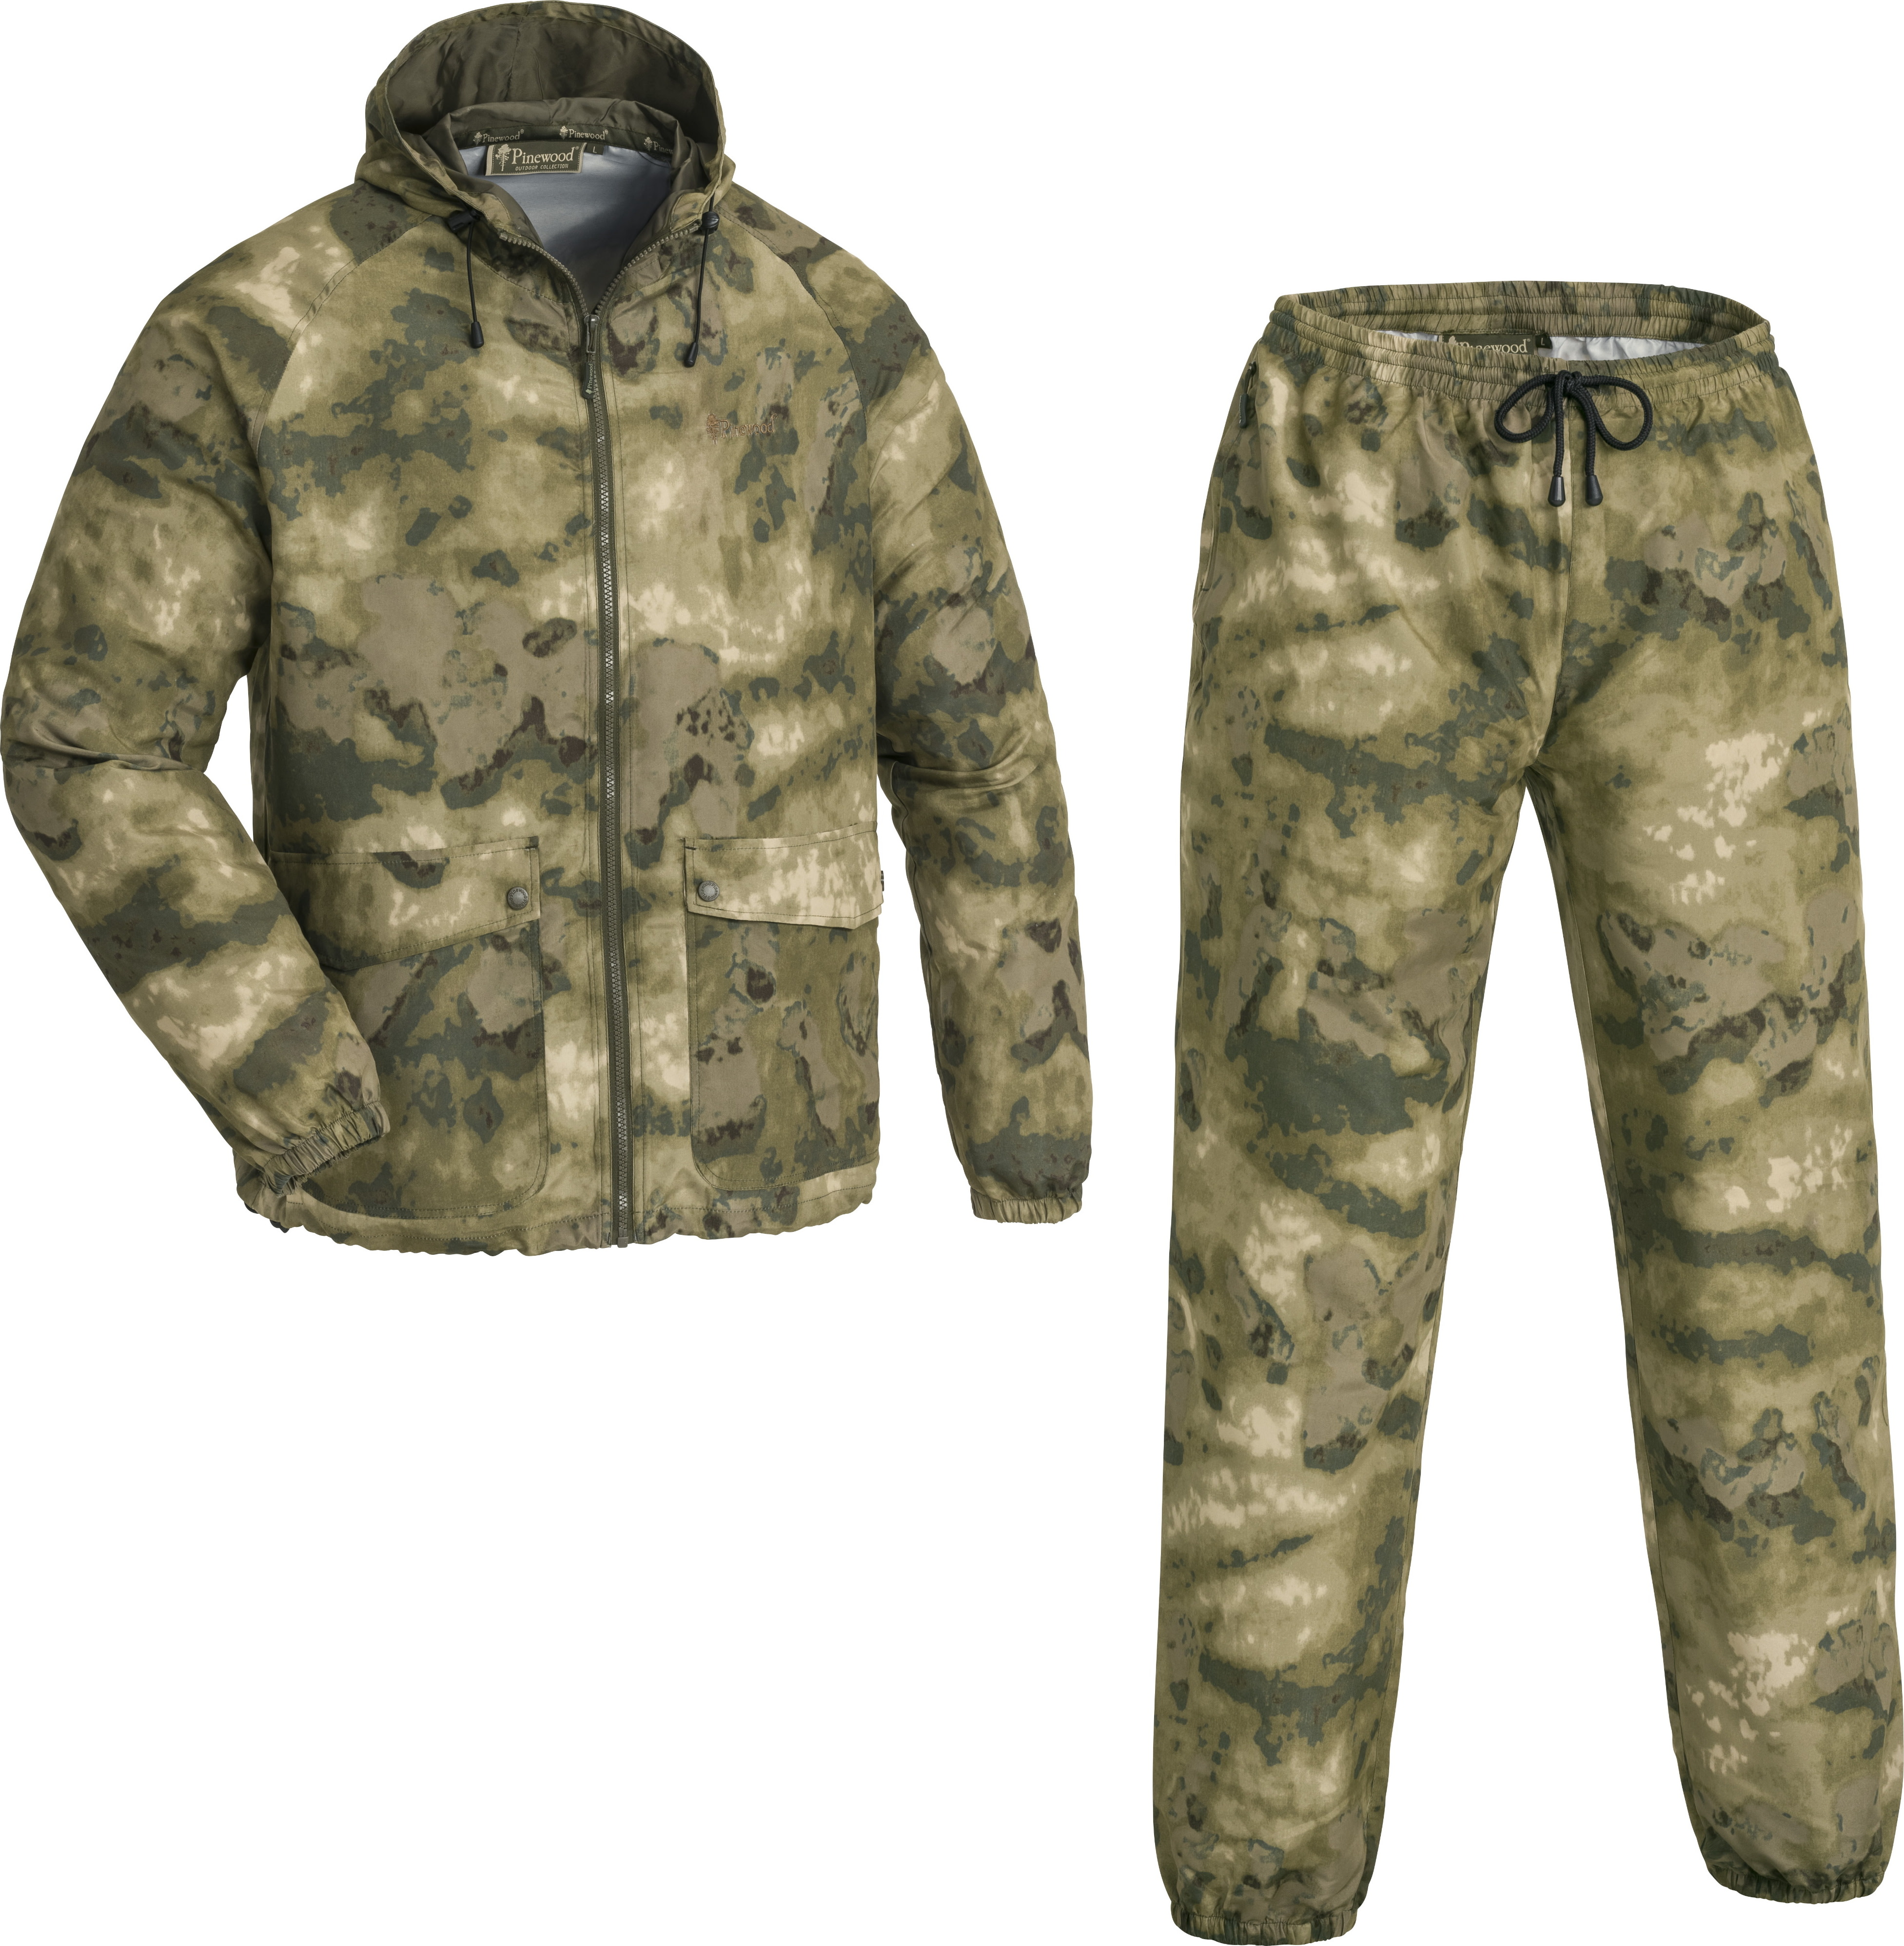 Pinewood Men’s Camou Cover Set Moss Camou